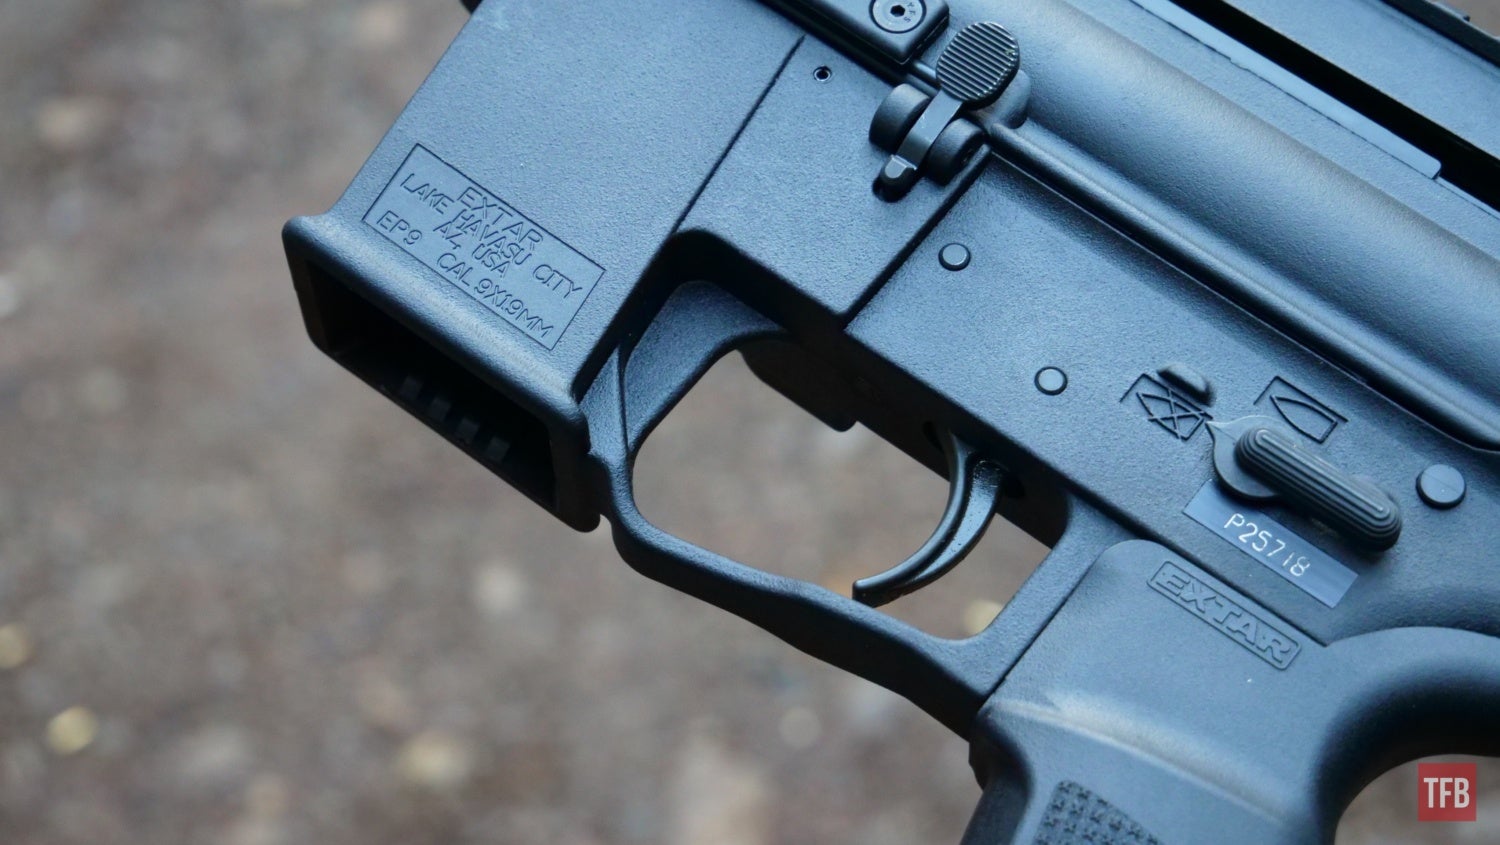 Together with fellow writer Lucas D, we shot around 500 rounds through the EP9 and used the much more expensive SIG MPX as something to help compare and contrast what each of these vastly different yet similar platforms do well.